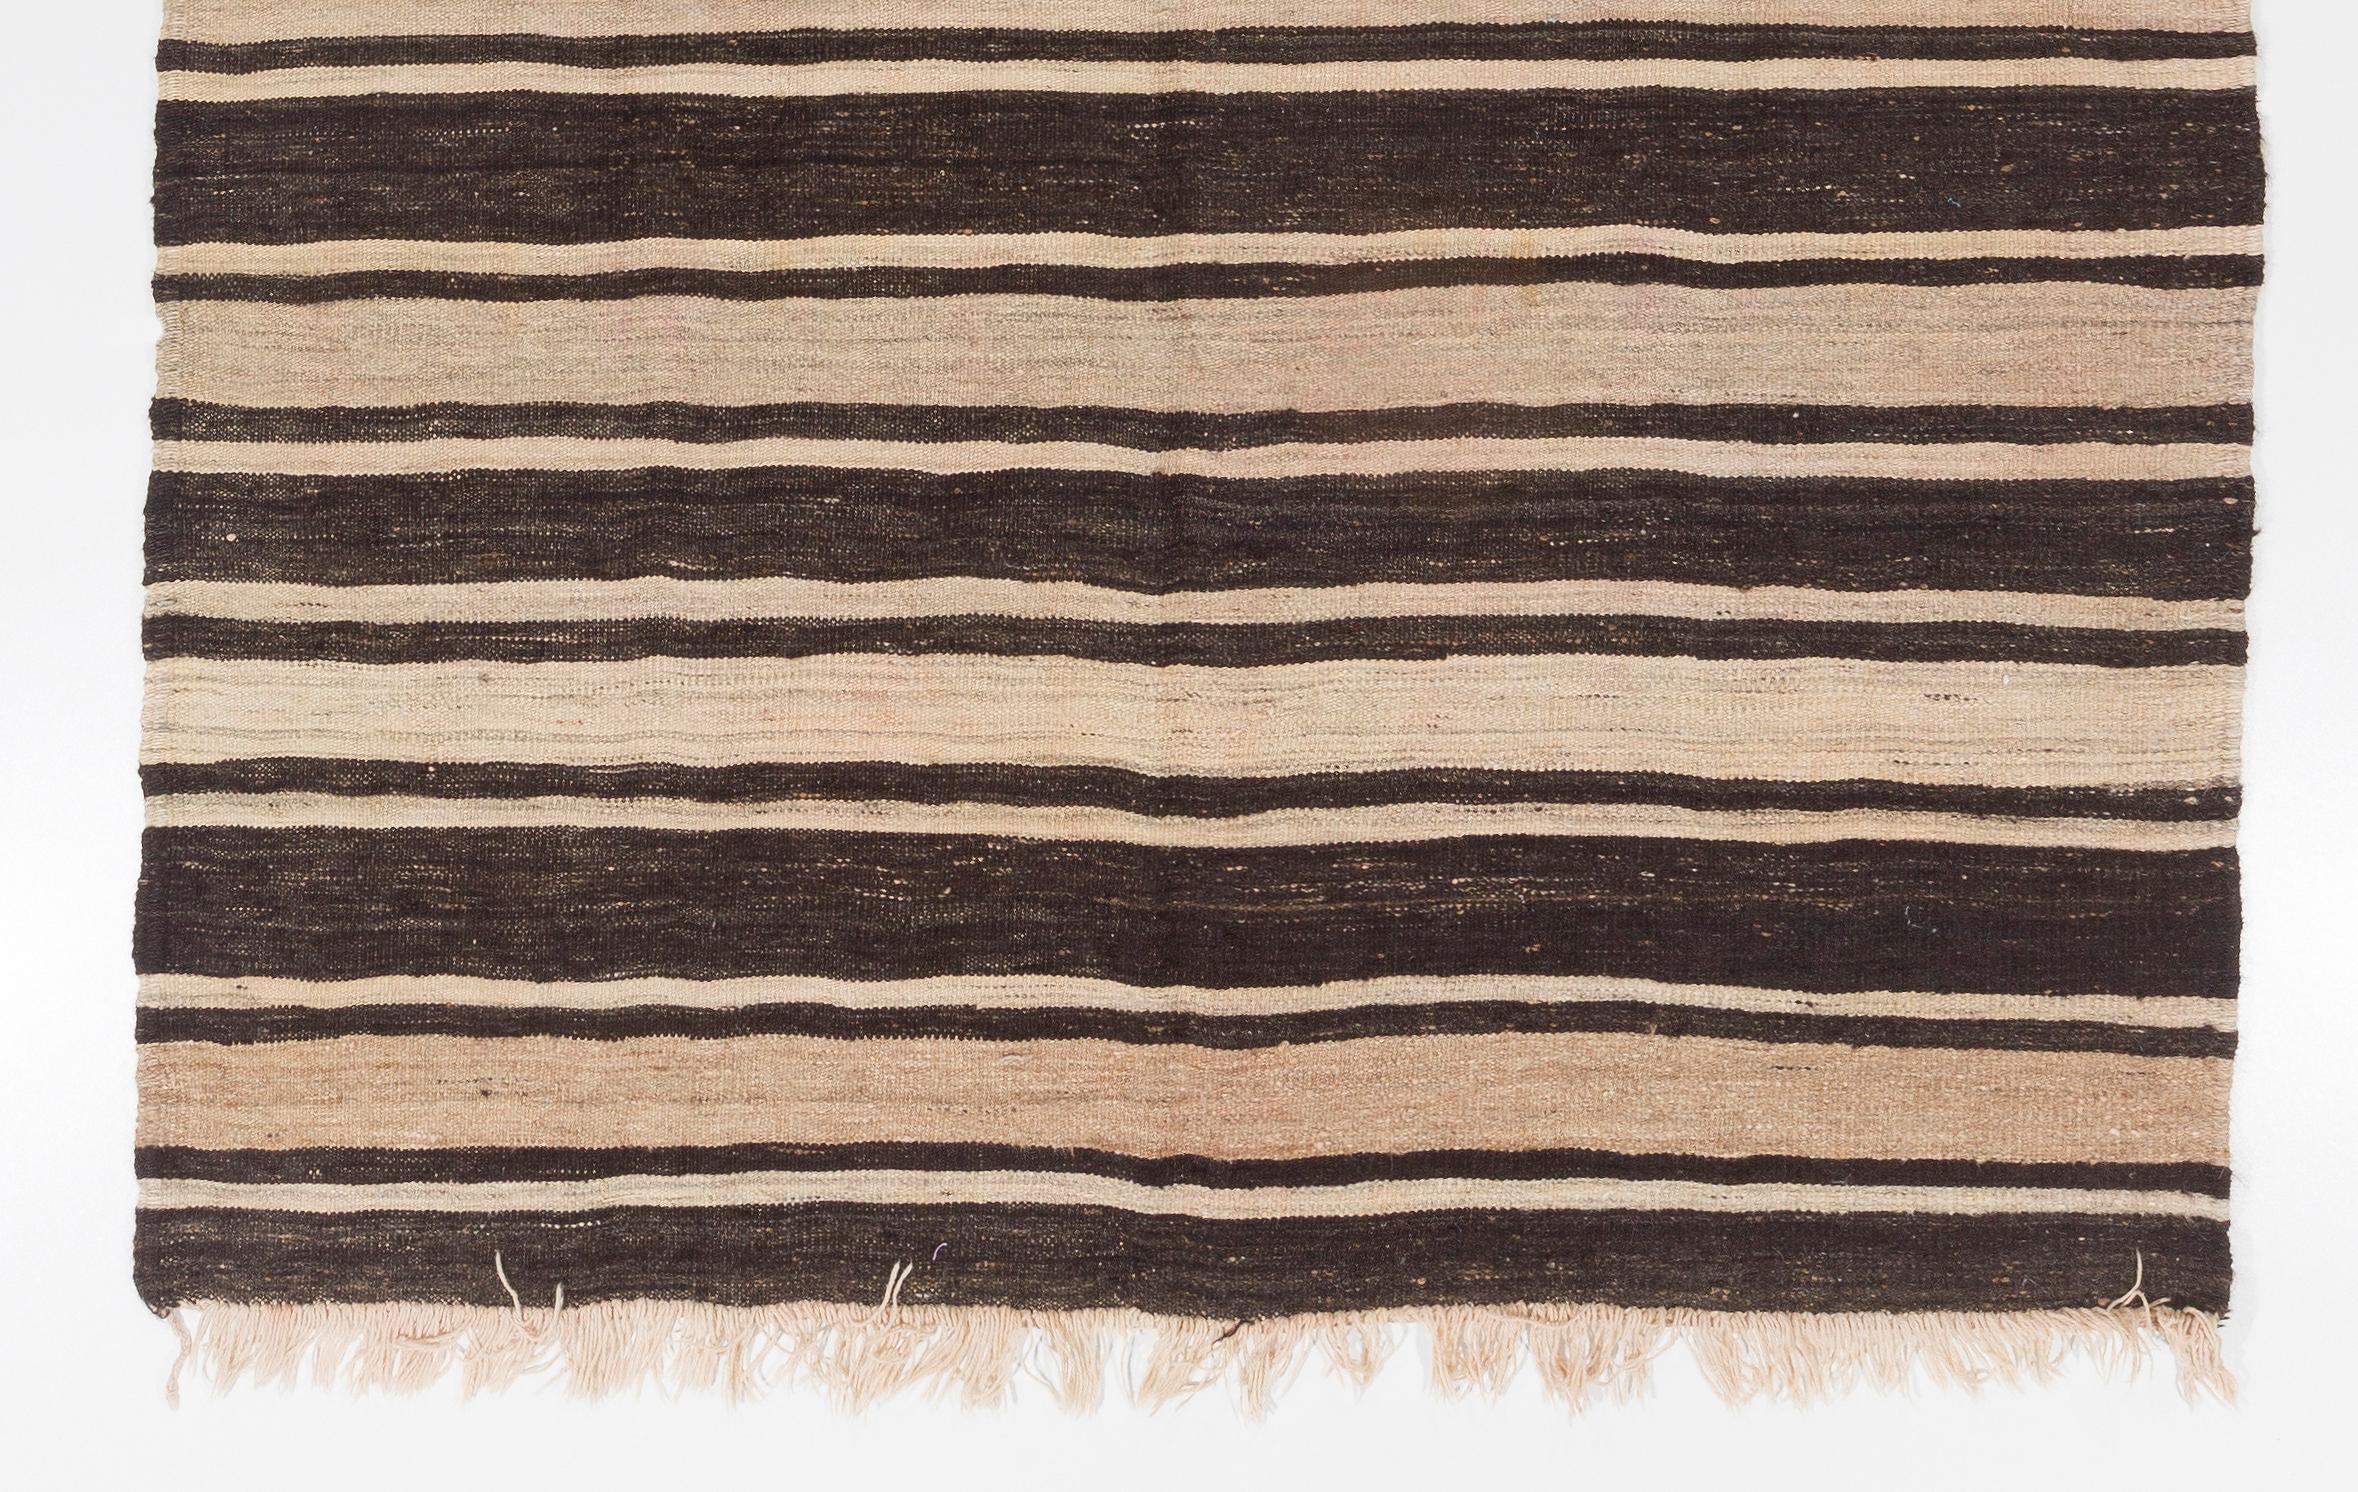 Hand-Woven 5.8x11.2 Ft Vintage Handmade Banded Anatolian Kilim in Beige and Brown Wool For Sale